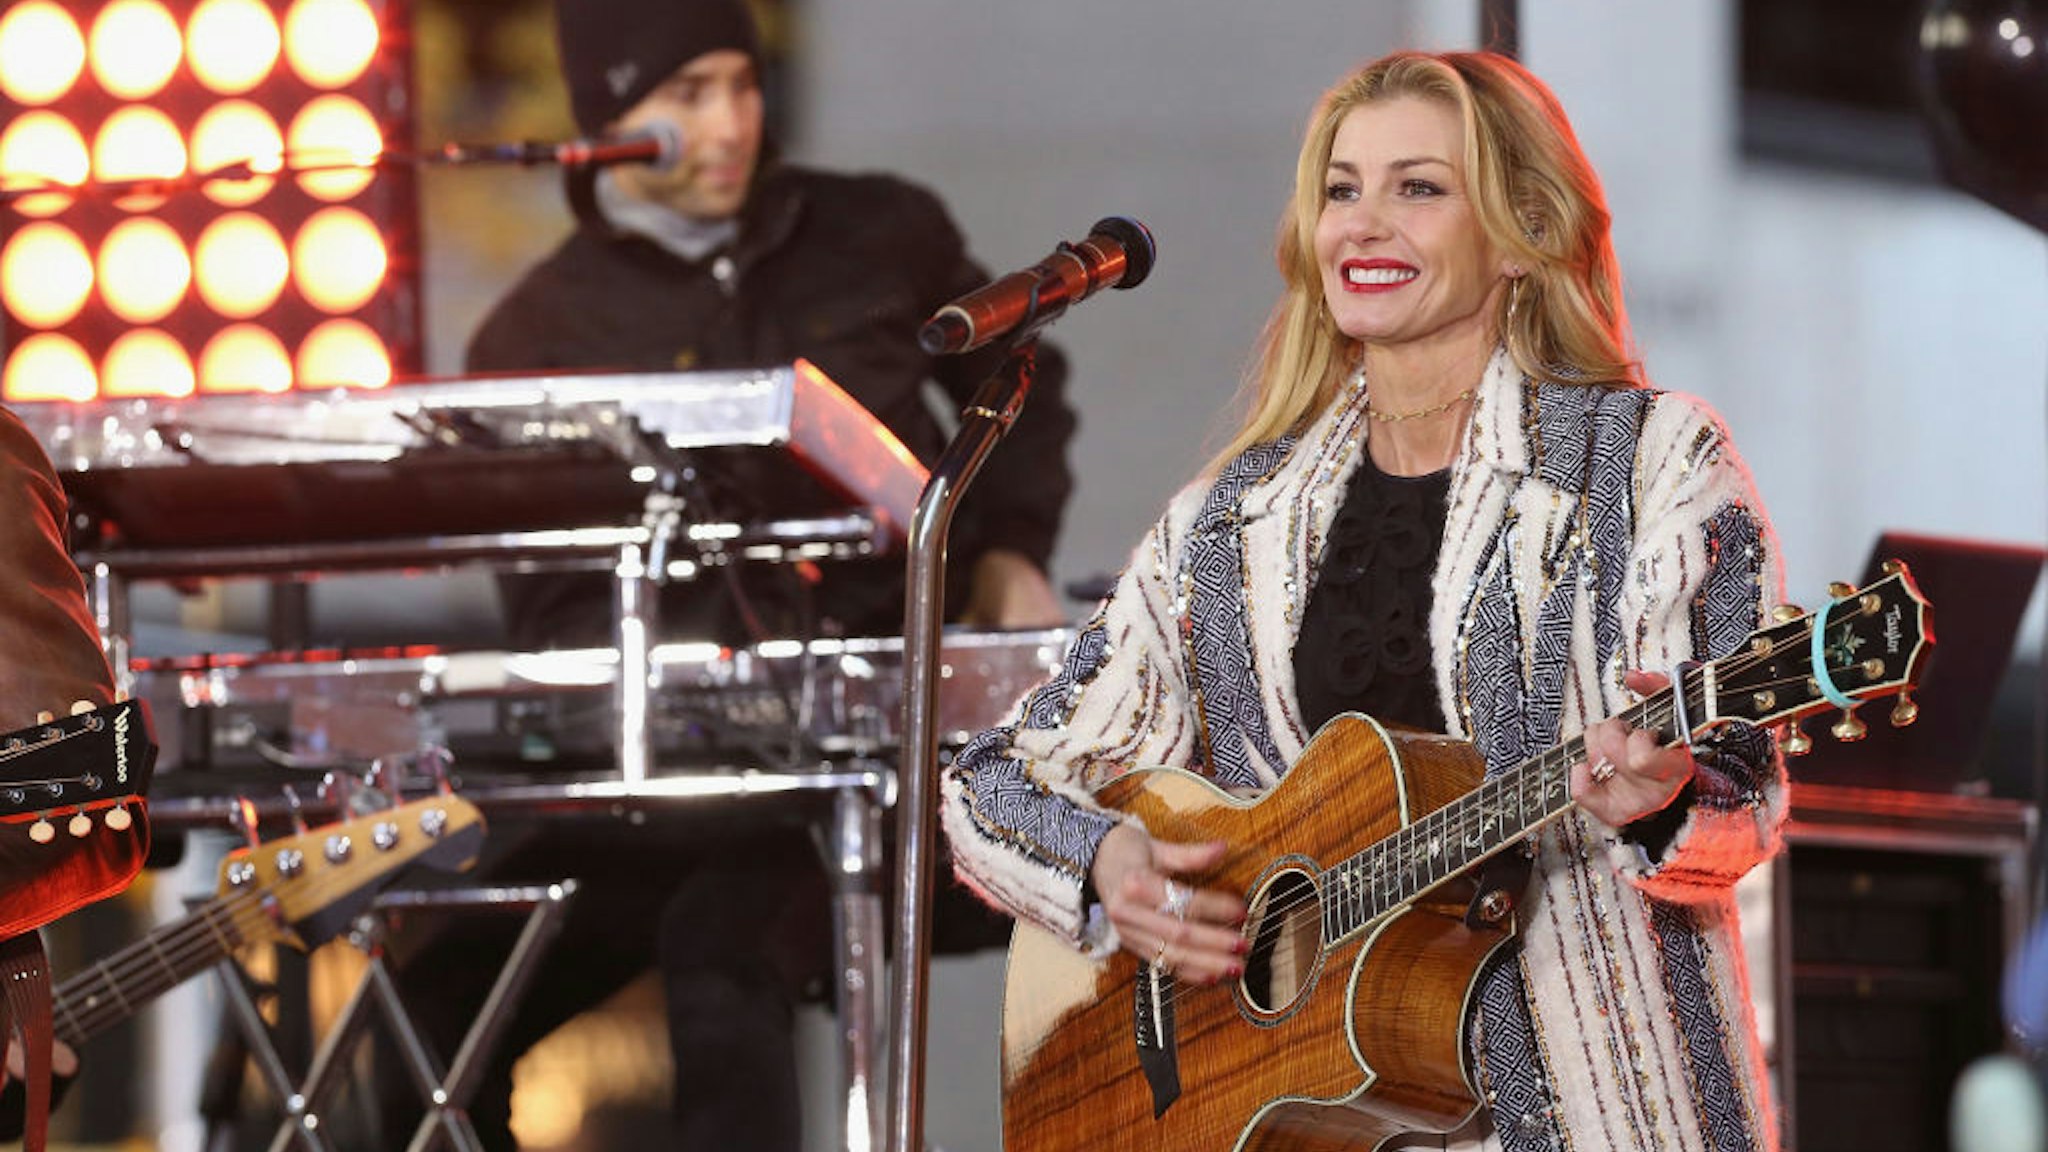 Faith Hill performs on NBC's "Today" Show at Rockefeller Plaza on November 17, 2017 in New York City.